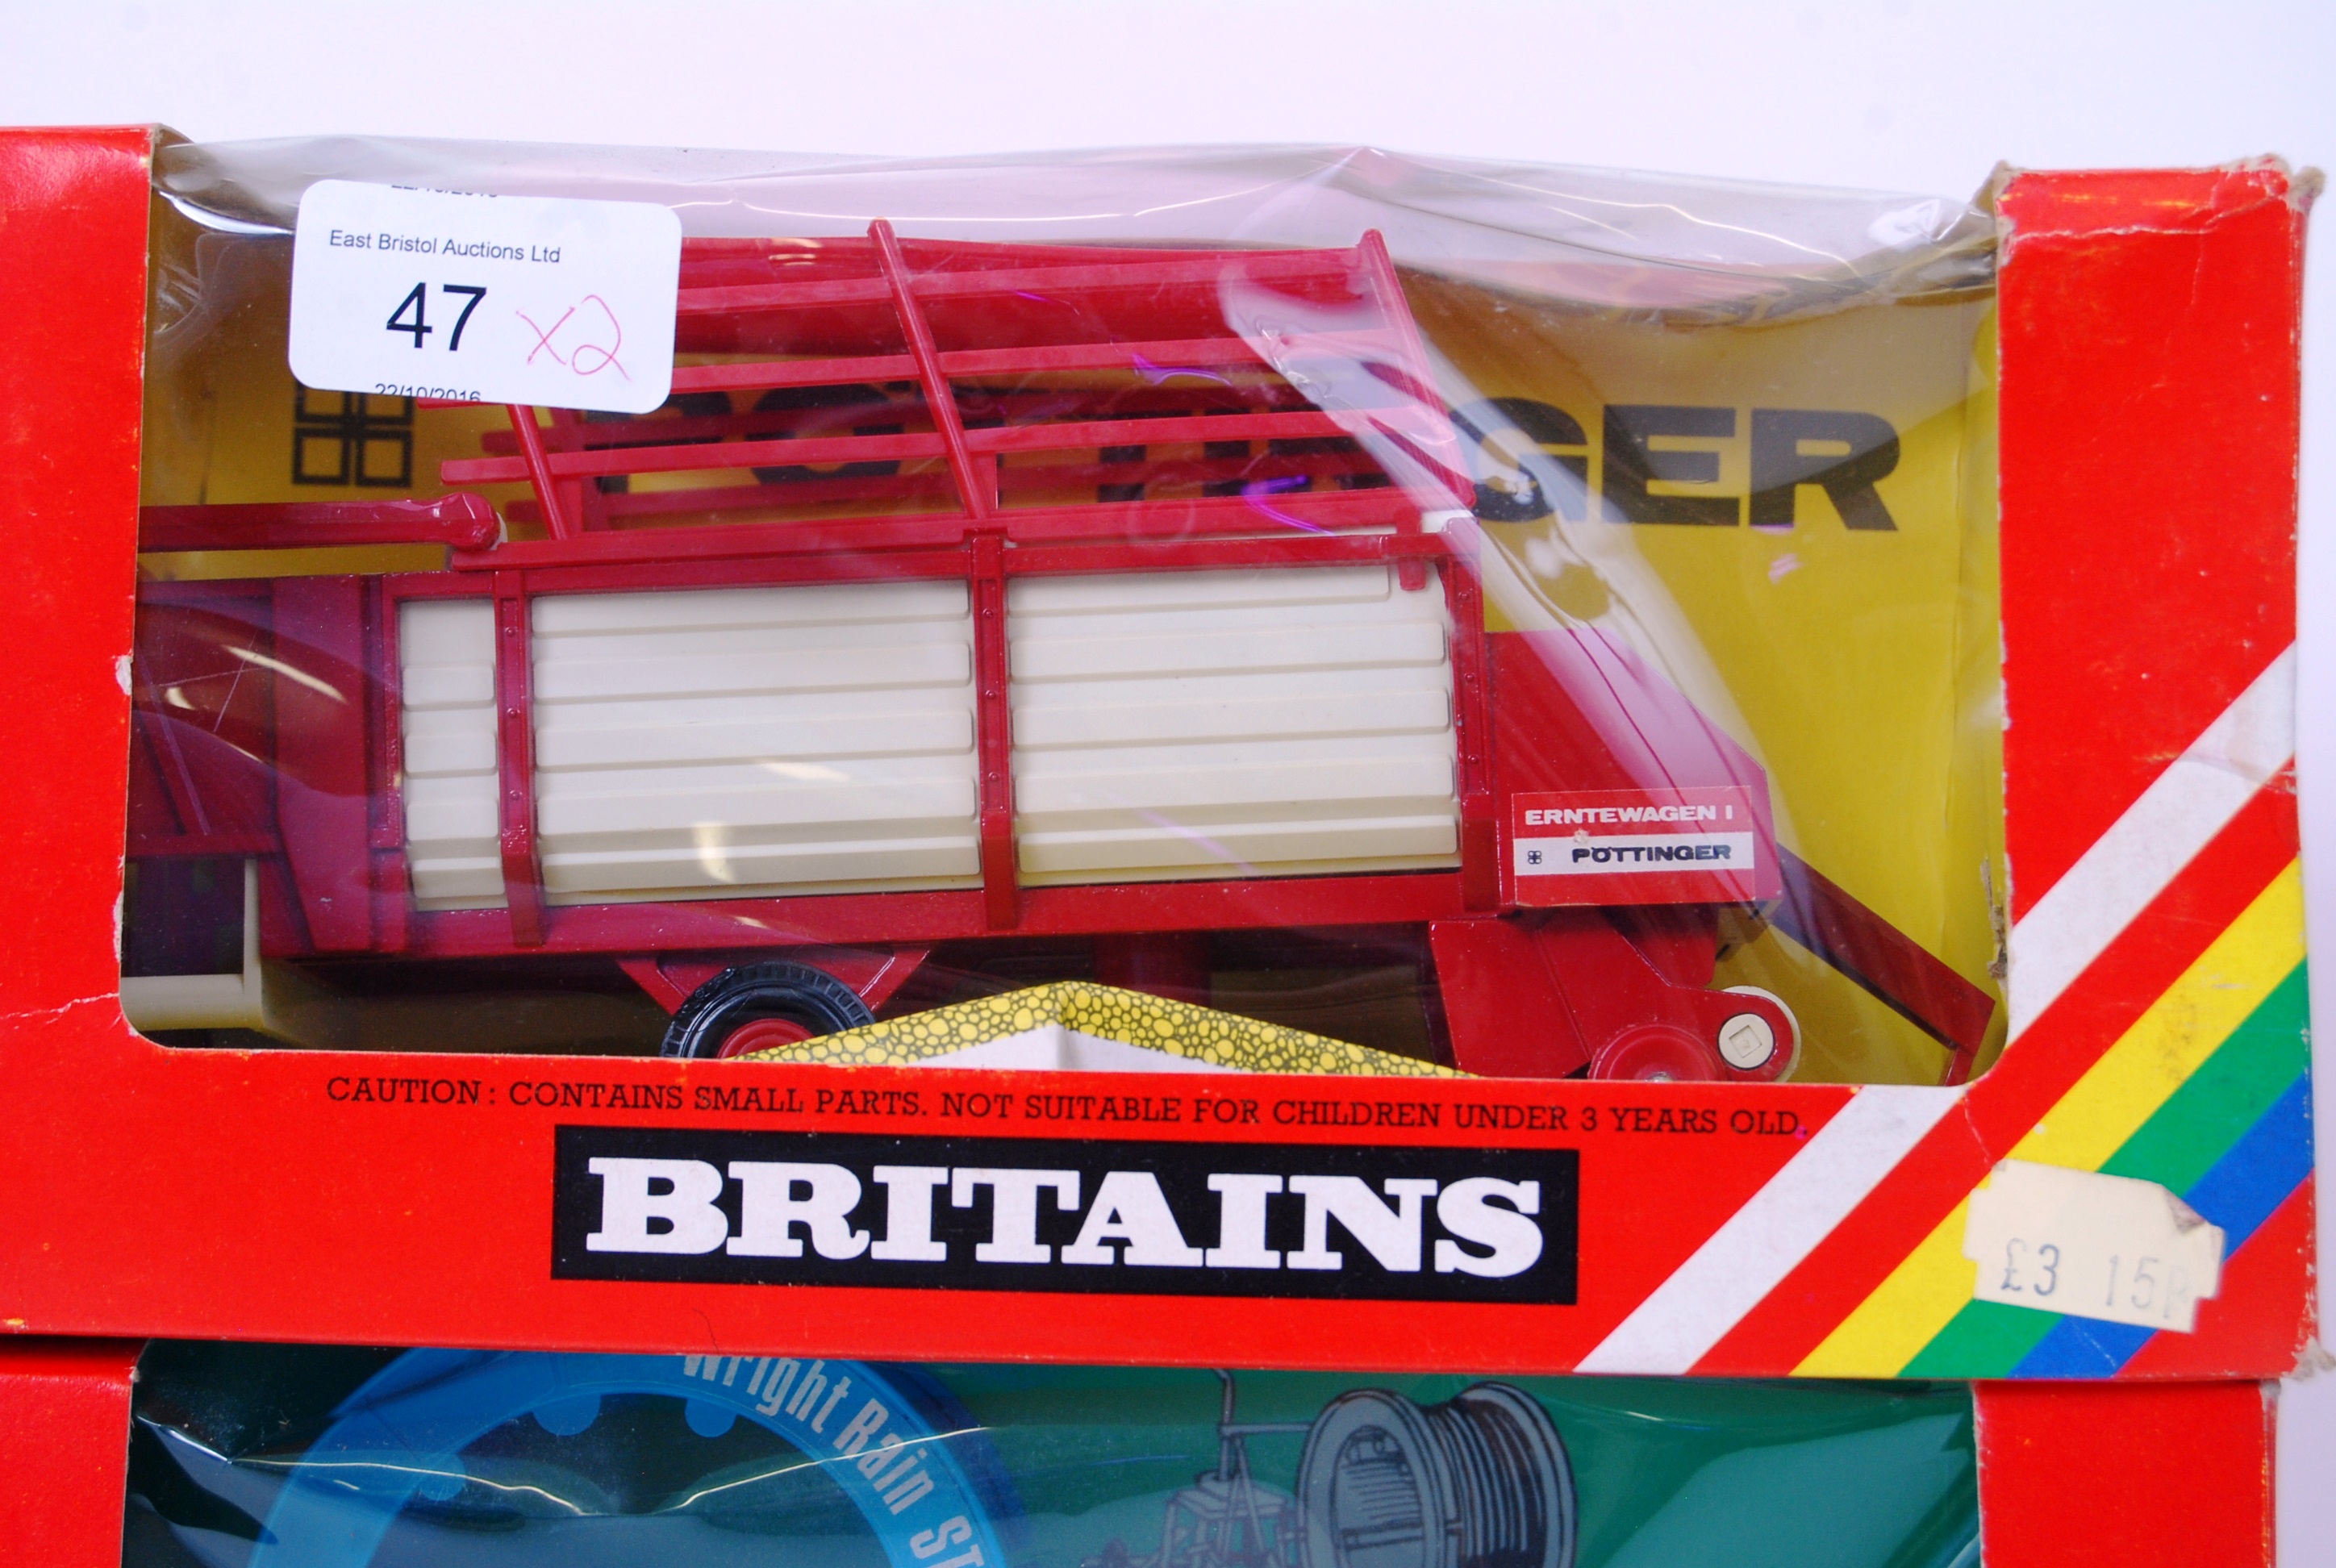 BRITAINS: 2x Britains farm related diecast models - 9578 Loader Wagon and 9547 Hose Drum Irrigator. - Image 3 of 4